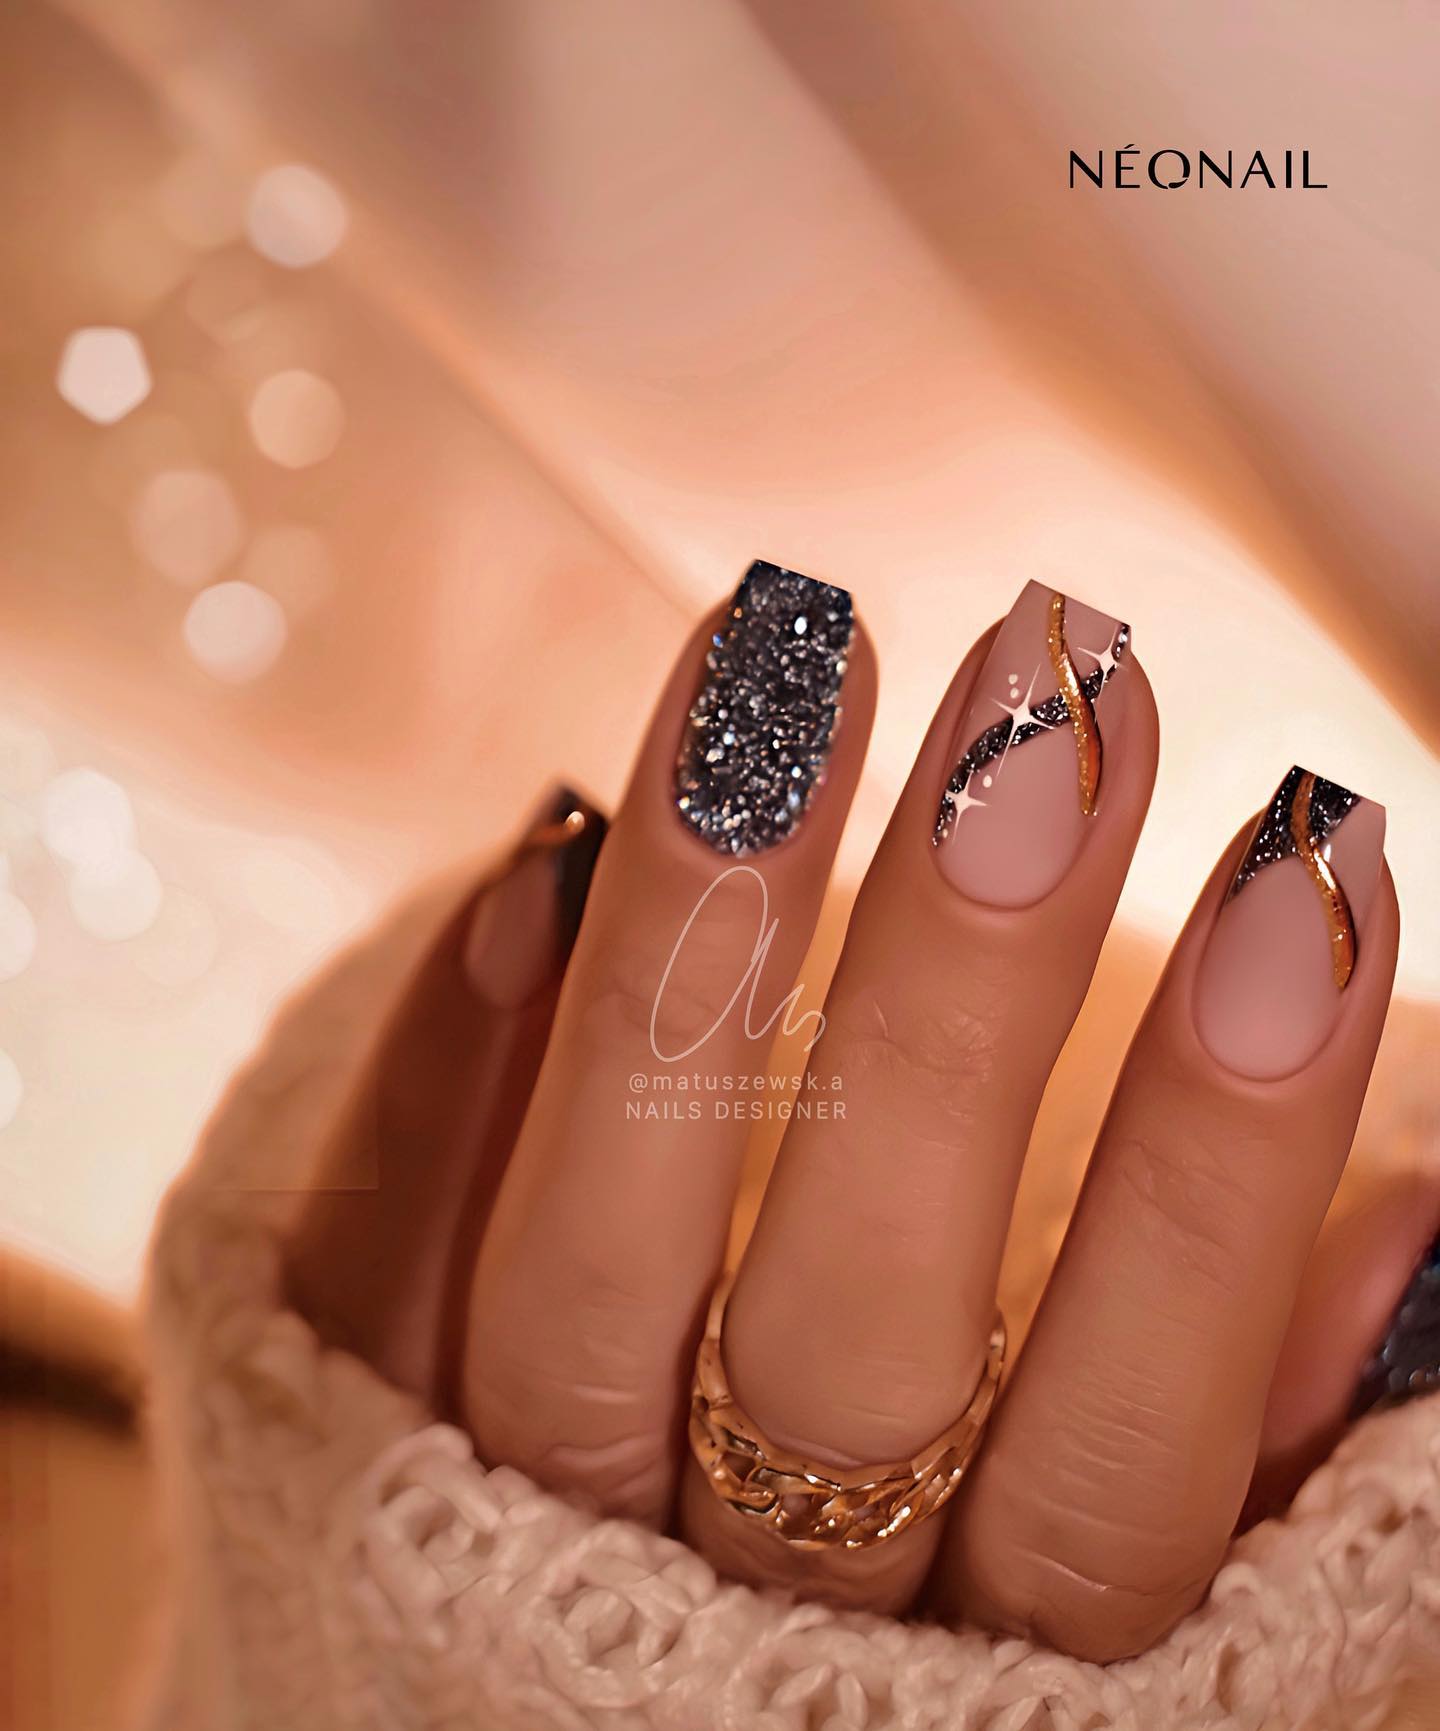 100+ Best Winter Nail Ideas And Designs To Try images 47